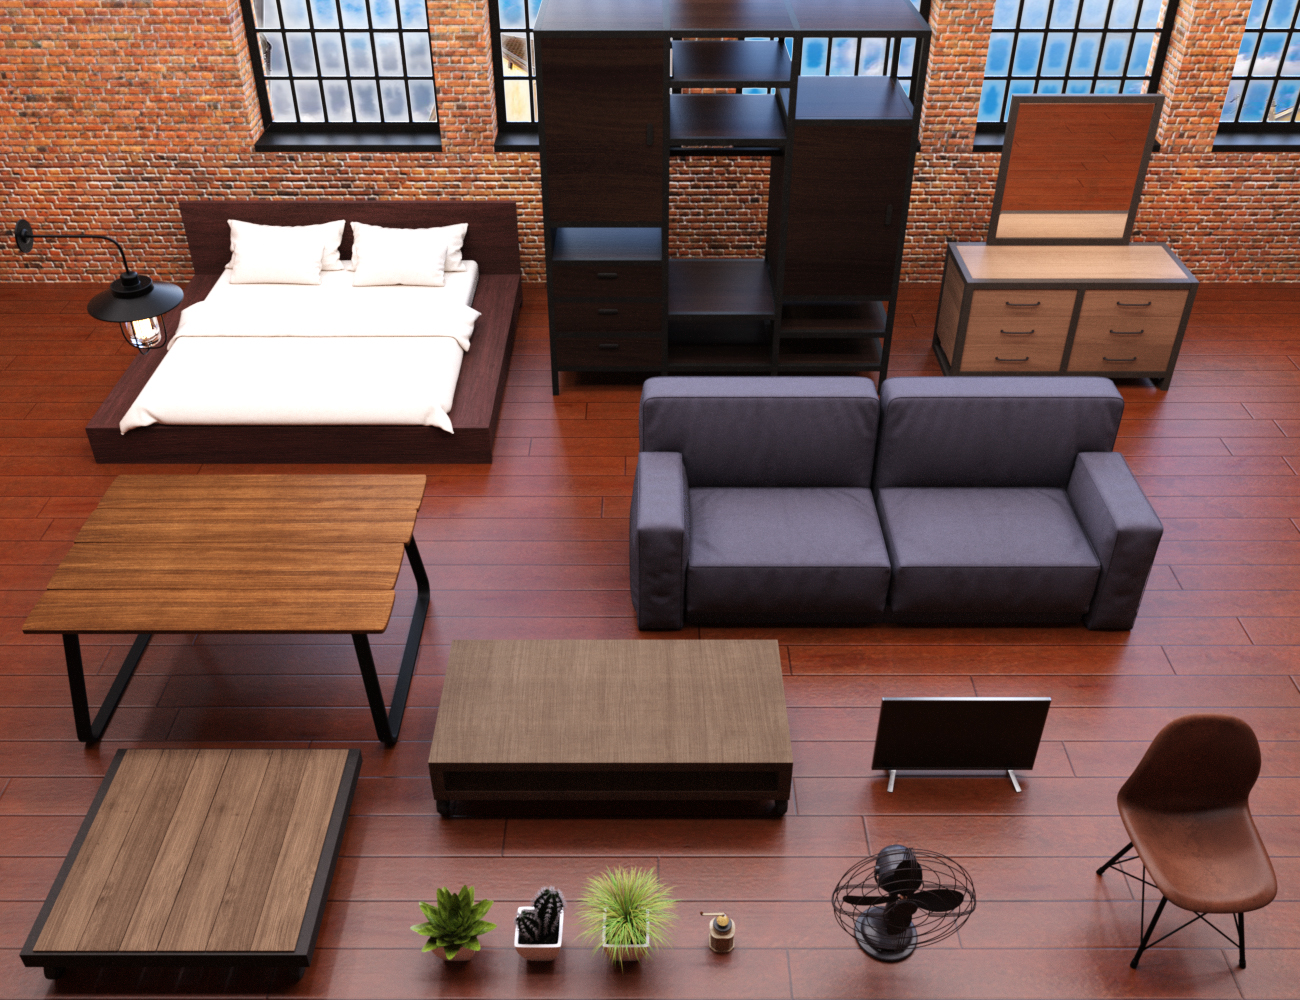 Industrial Loft by: Charlie, 3D Models by Daz 3D